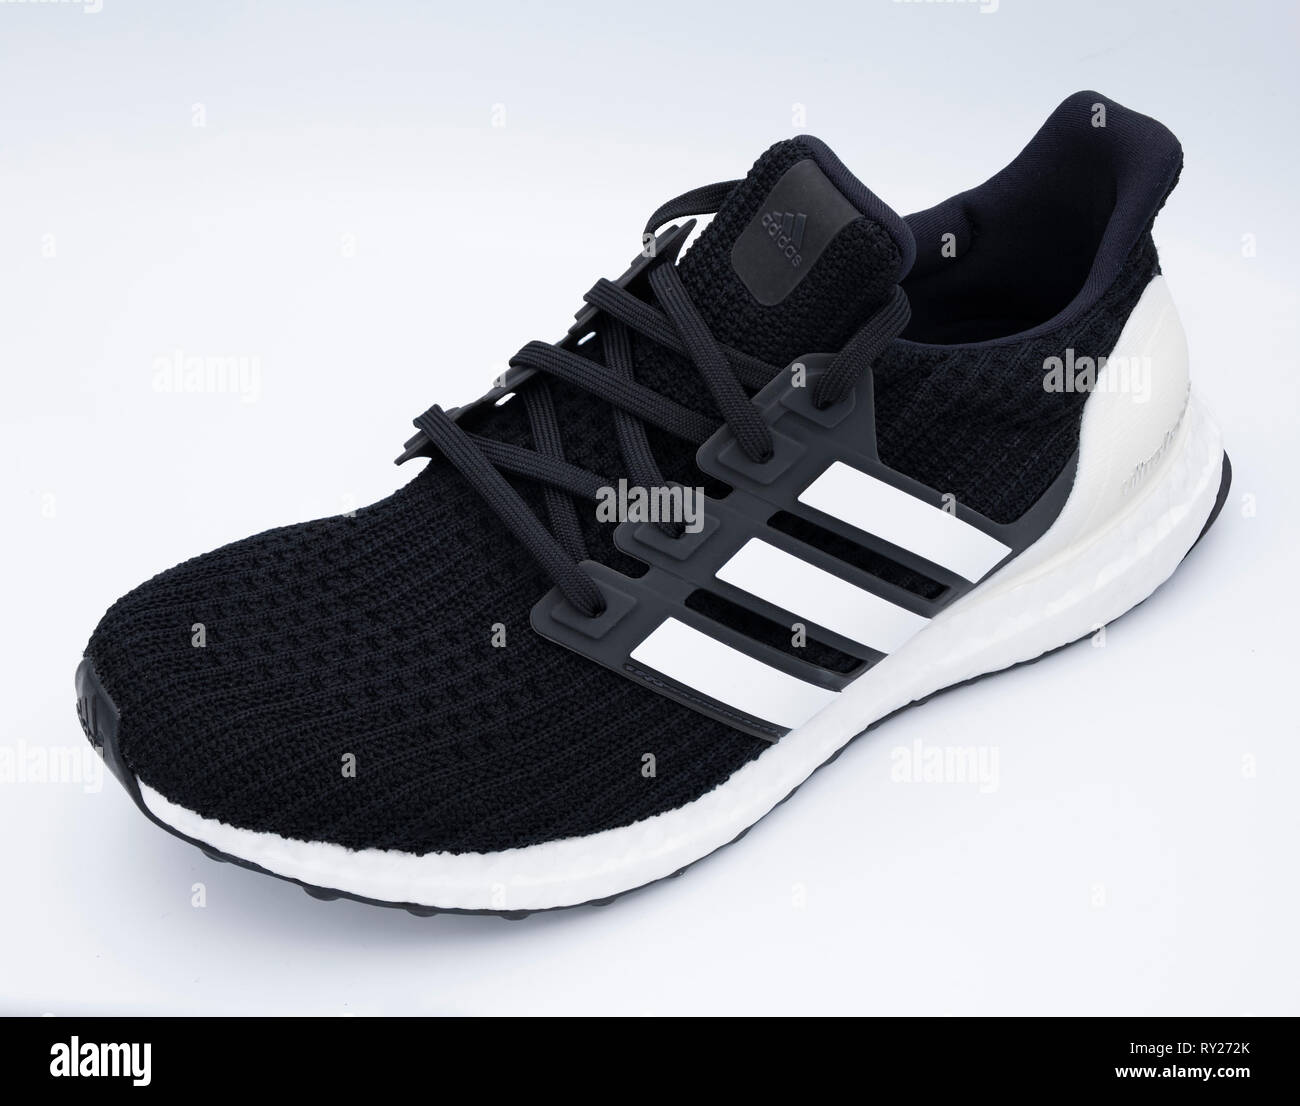 Adidas Ultraboost sneaker cut out isolated on white background Stock Photo  - Alamy